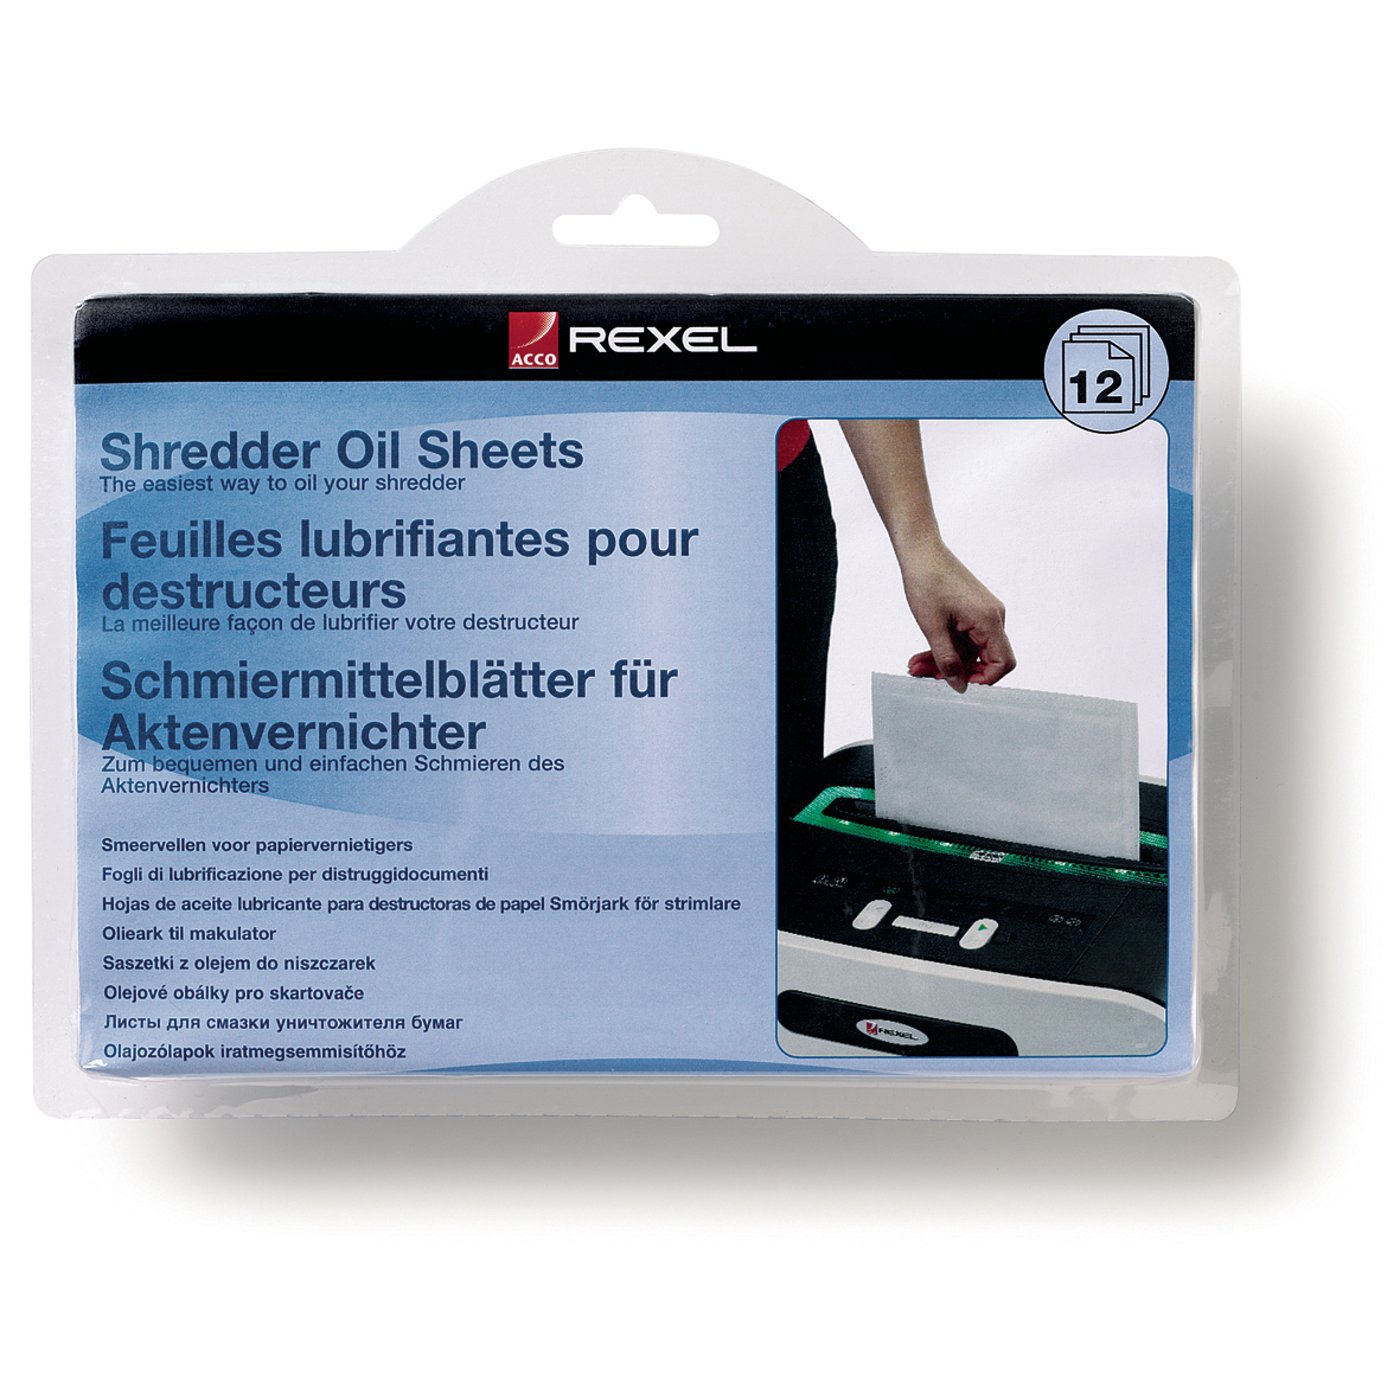 Rexel Shredder Oil Sheets (Pkt of 12) - Click Image to Close